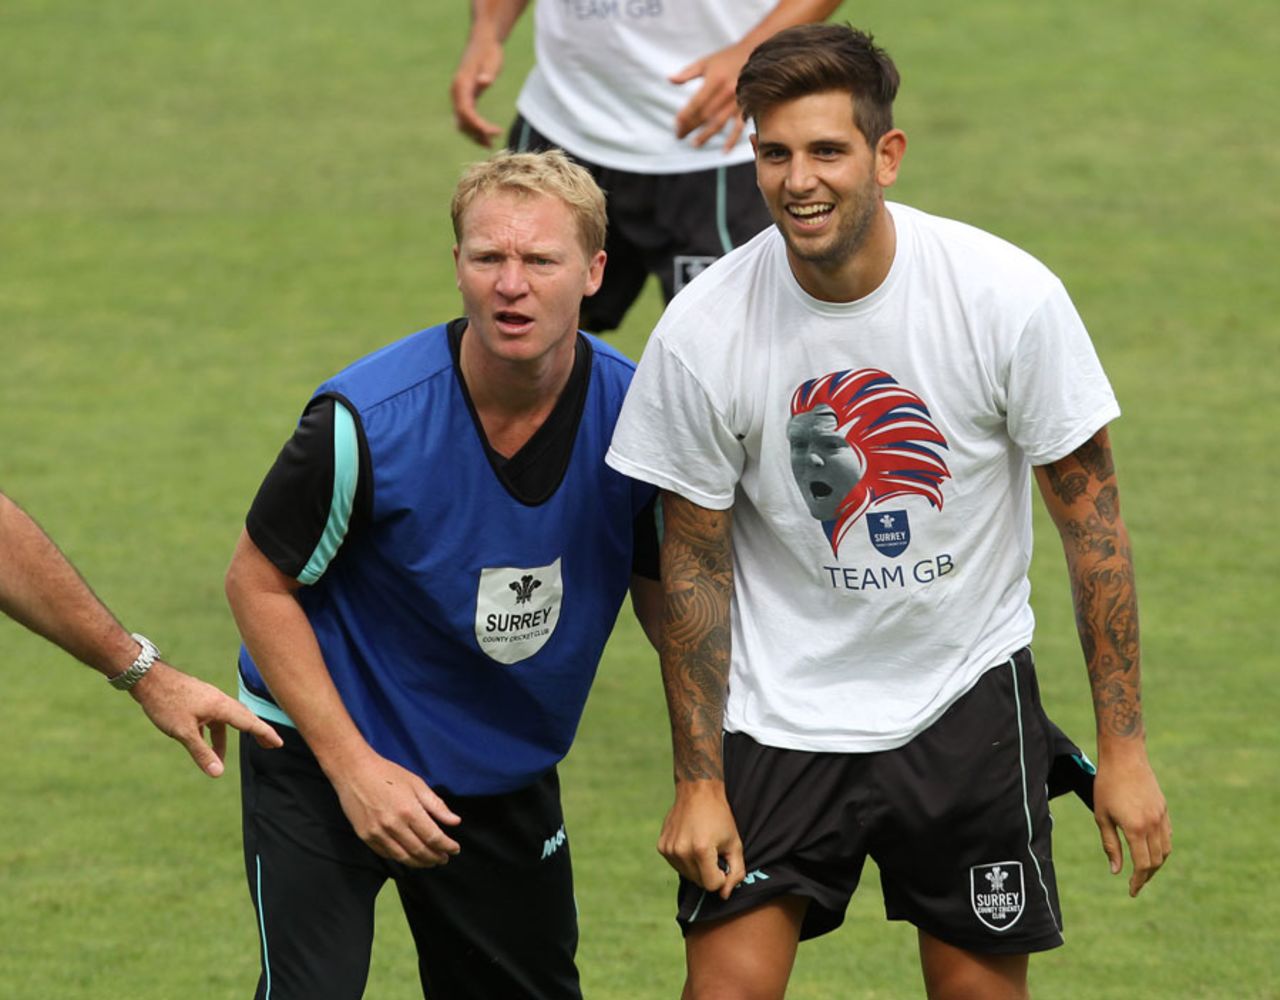 Jade Dernbach sports a modified Team GB t-shirt, this variety celebrating their captain Gareth Batty, Surrey v Middlesex, County Championship, Division One, 3rd day, August 17, 2012